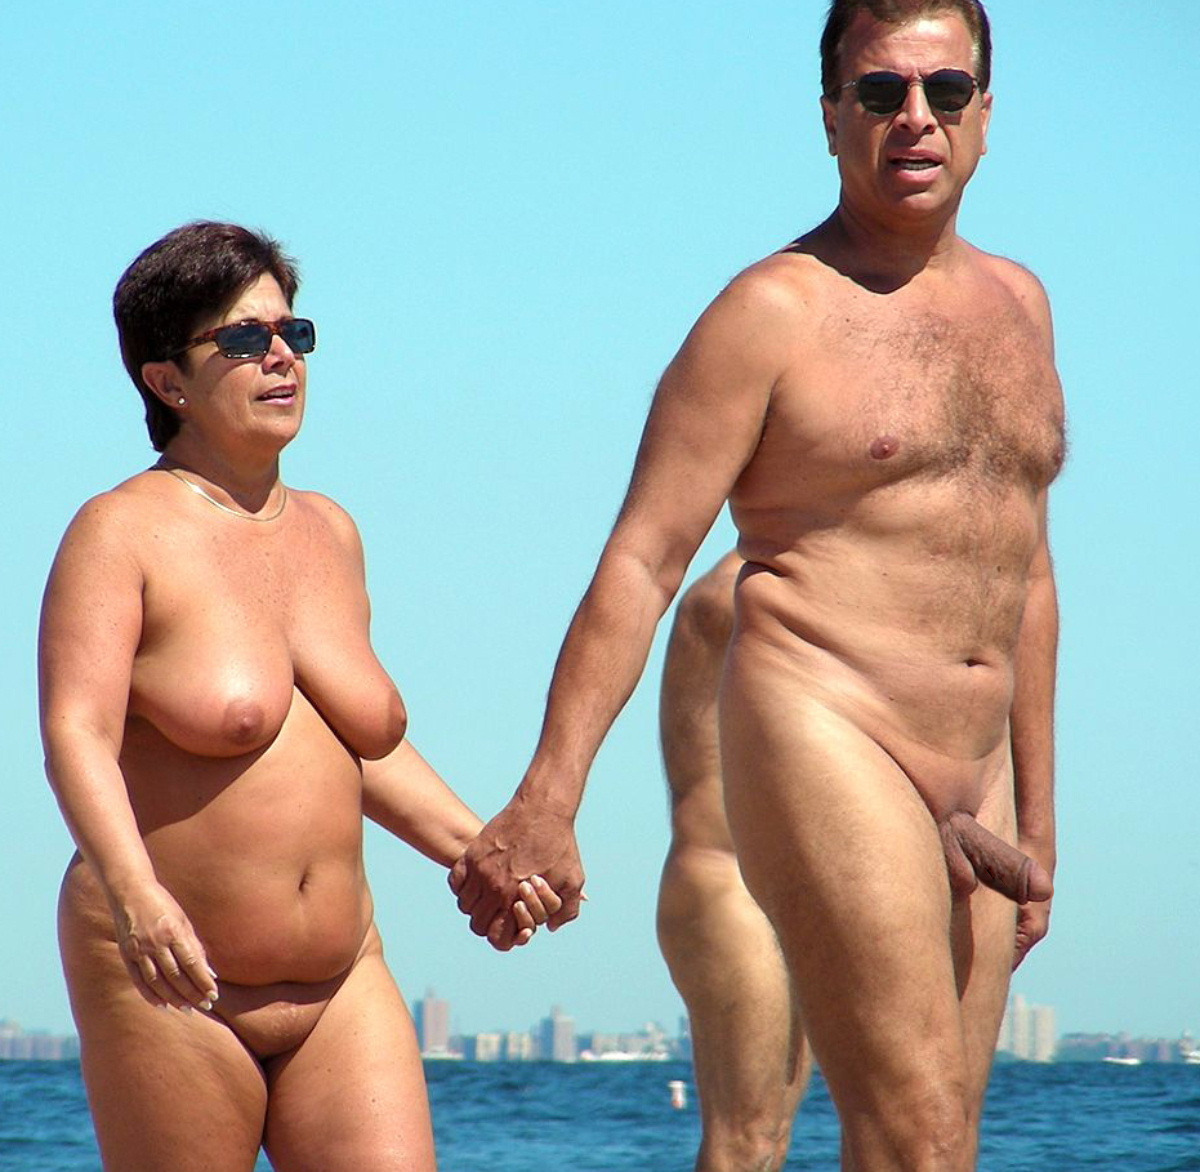 Mixed couple with erection nude beach